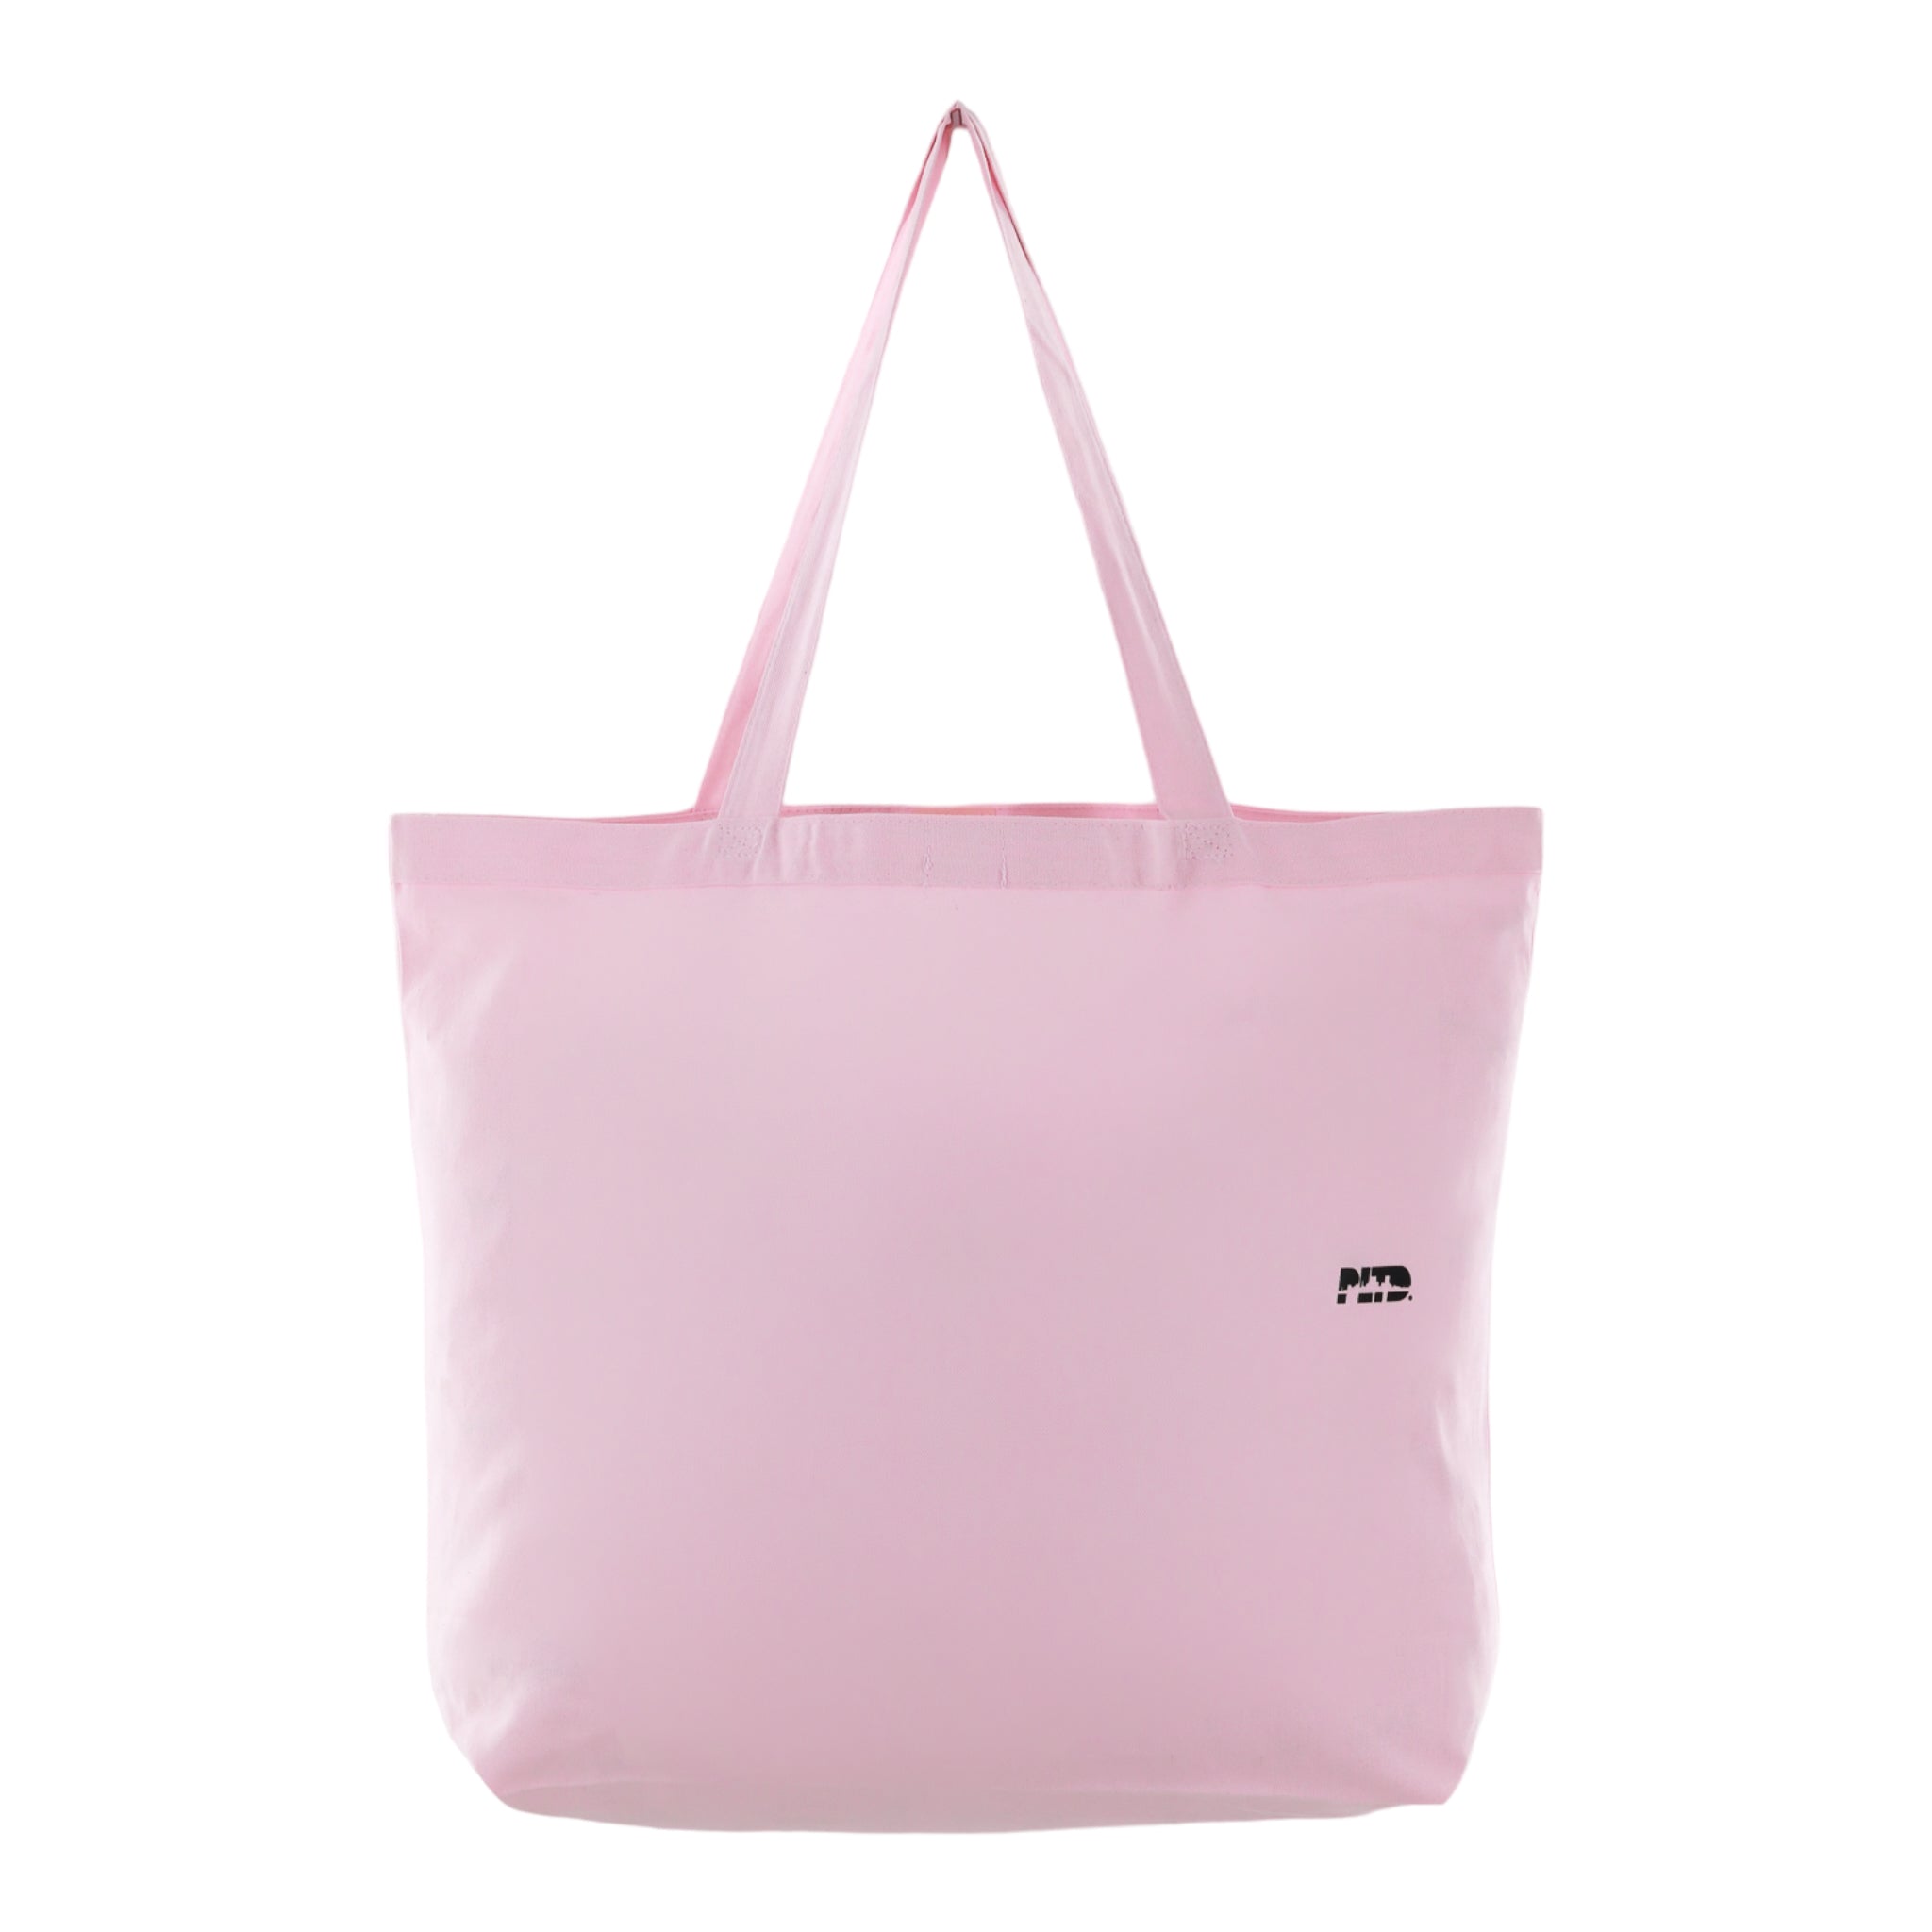 Stay Out of Uptown - Soft Pink Canvas Tote Bag – PericoLimited